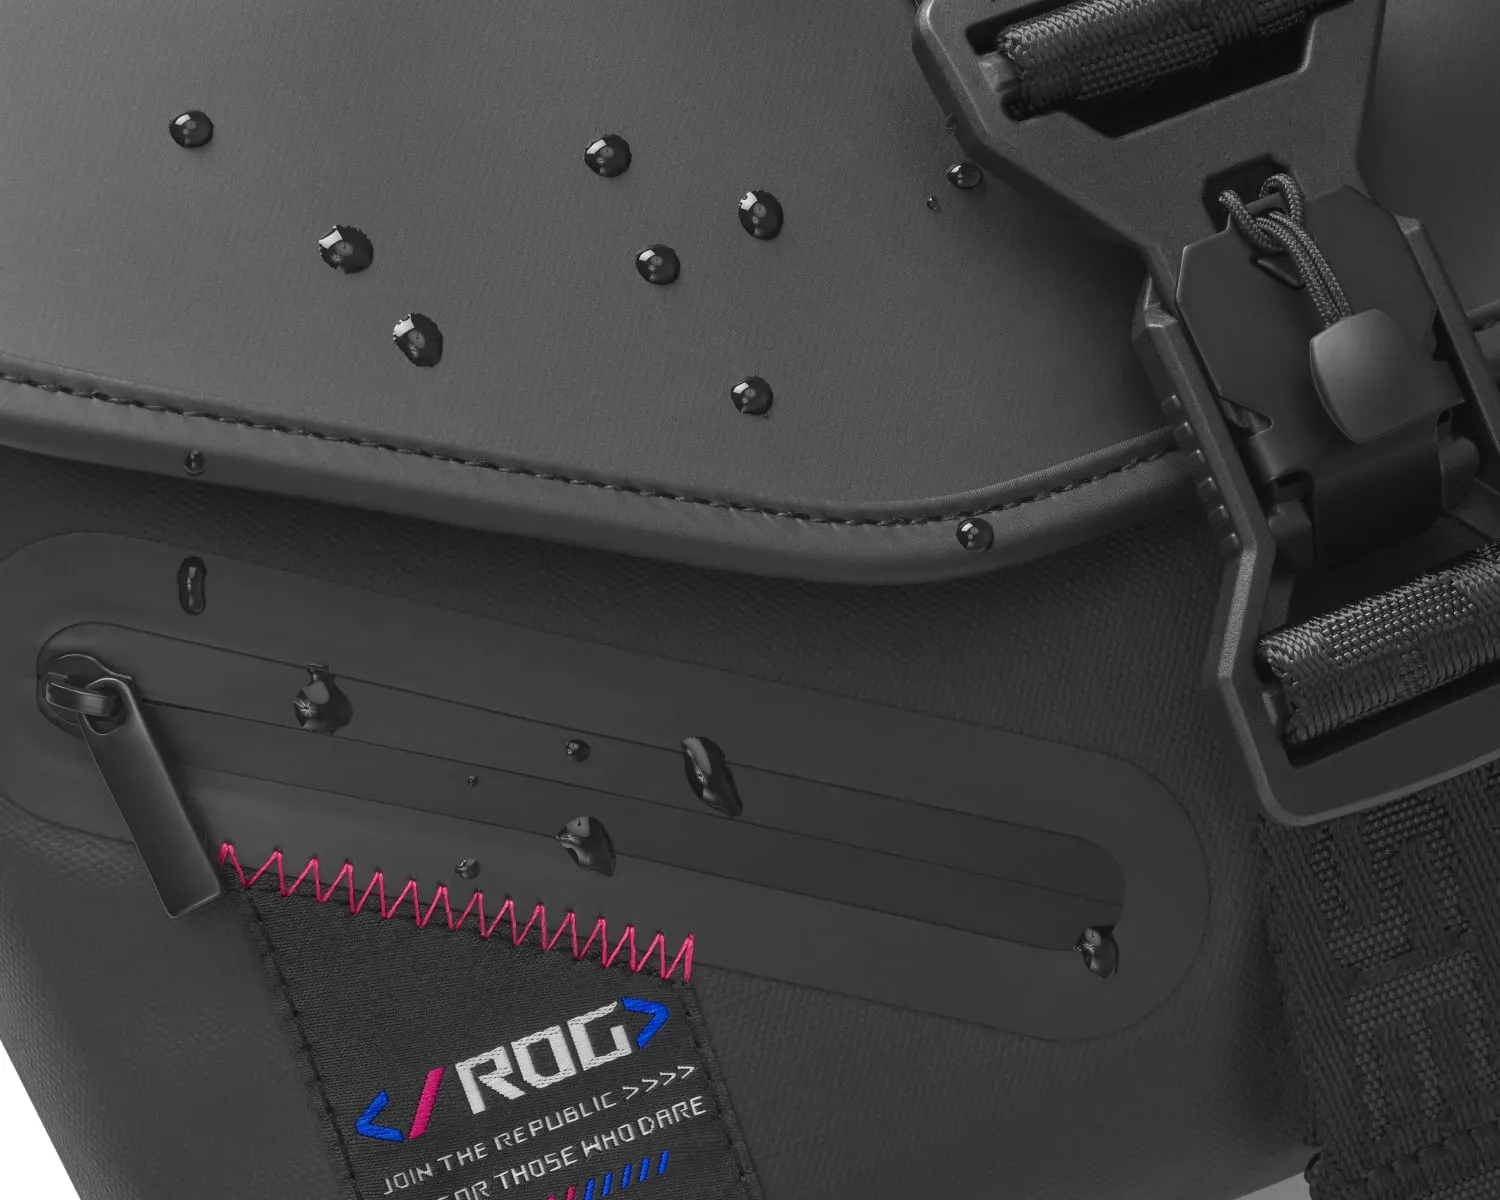 Close-up of the water resistant material and zipper of the ROG SLASH Sling Bag 2.0